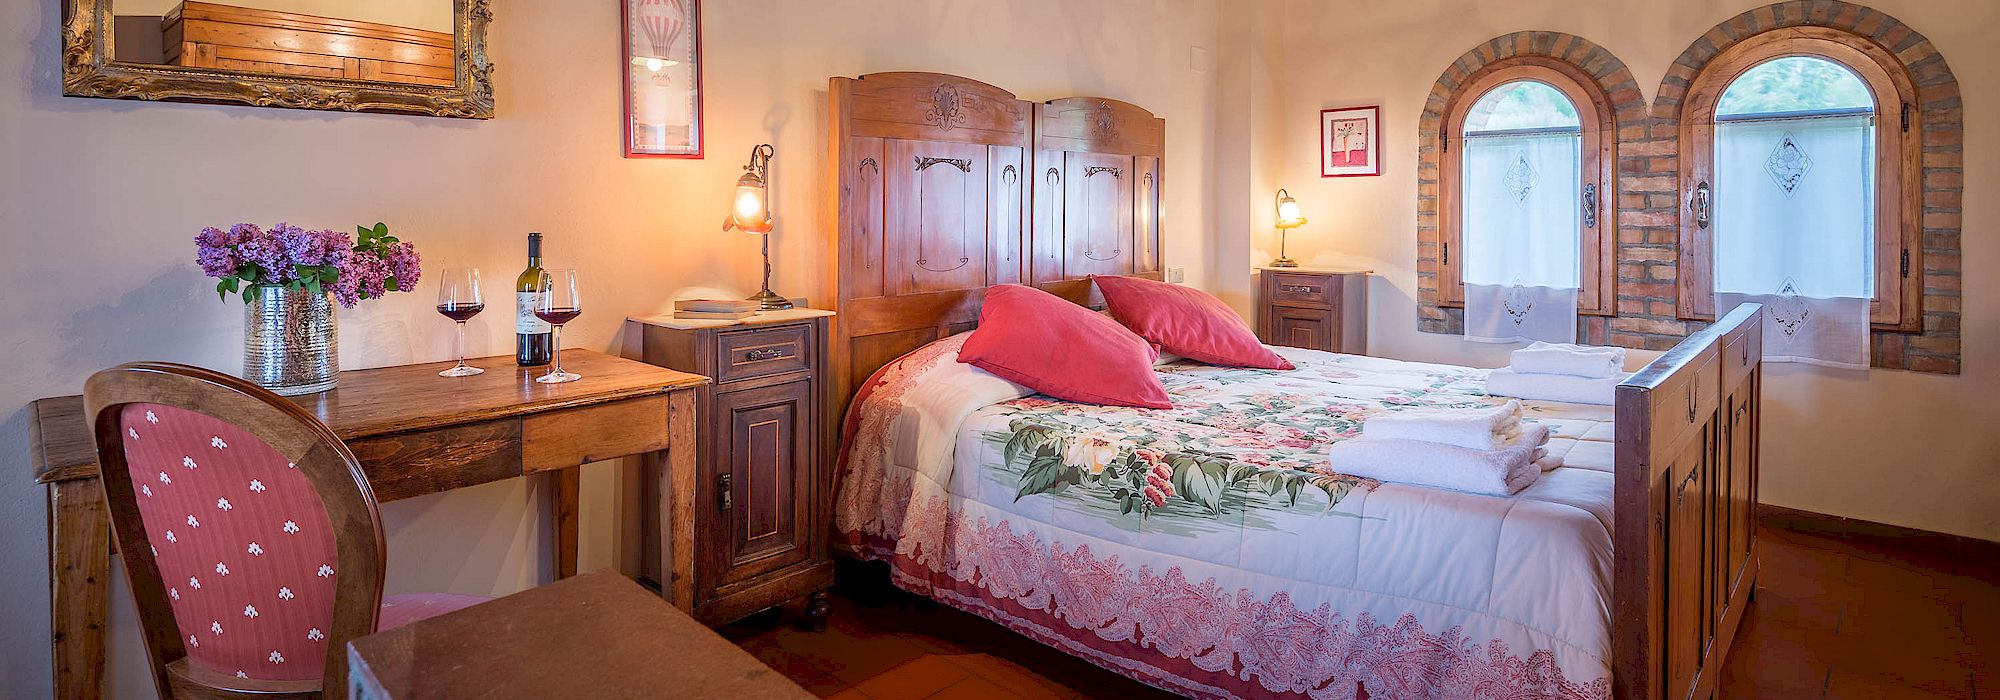 Agriturismo in Chianti Bed and Breakfast